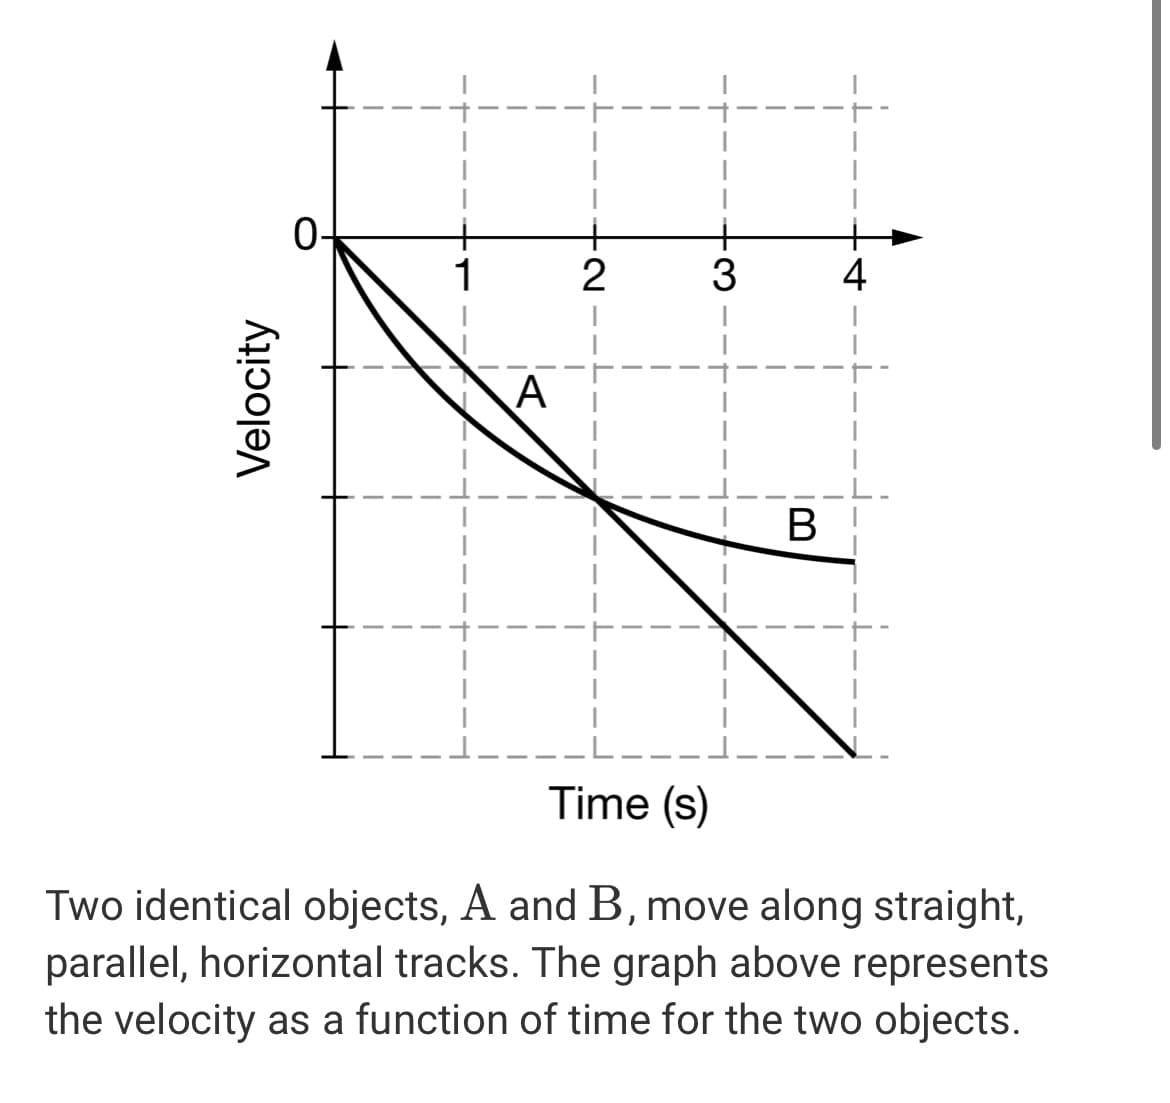 0-
1
4
A
В
Time (s)
Two identical objects, A and B, move along straight,
parallel, horizontal tracks. The graph above represents
the velocity as a function of time for the two objects.
Velocity
N.
